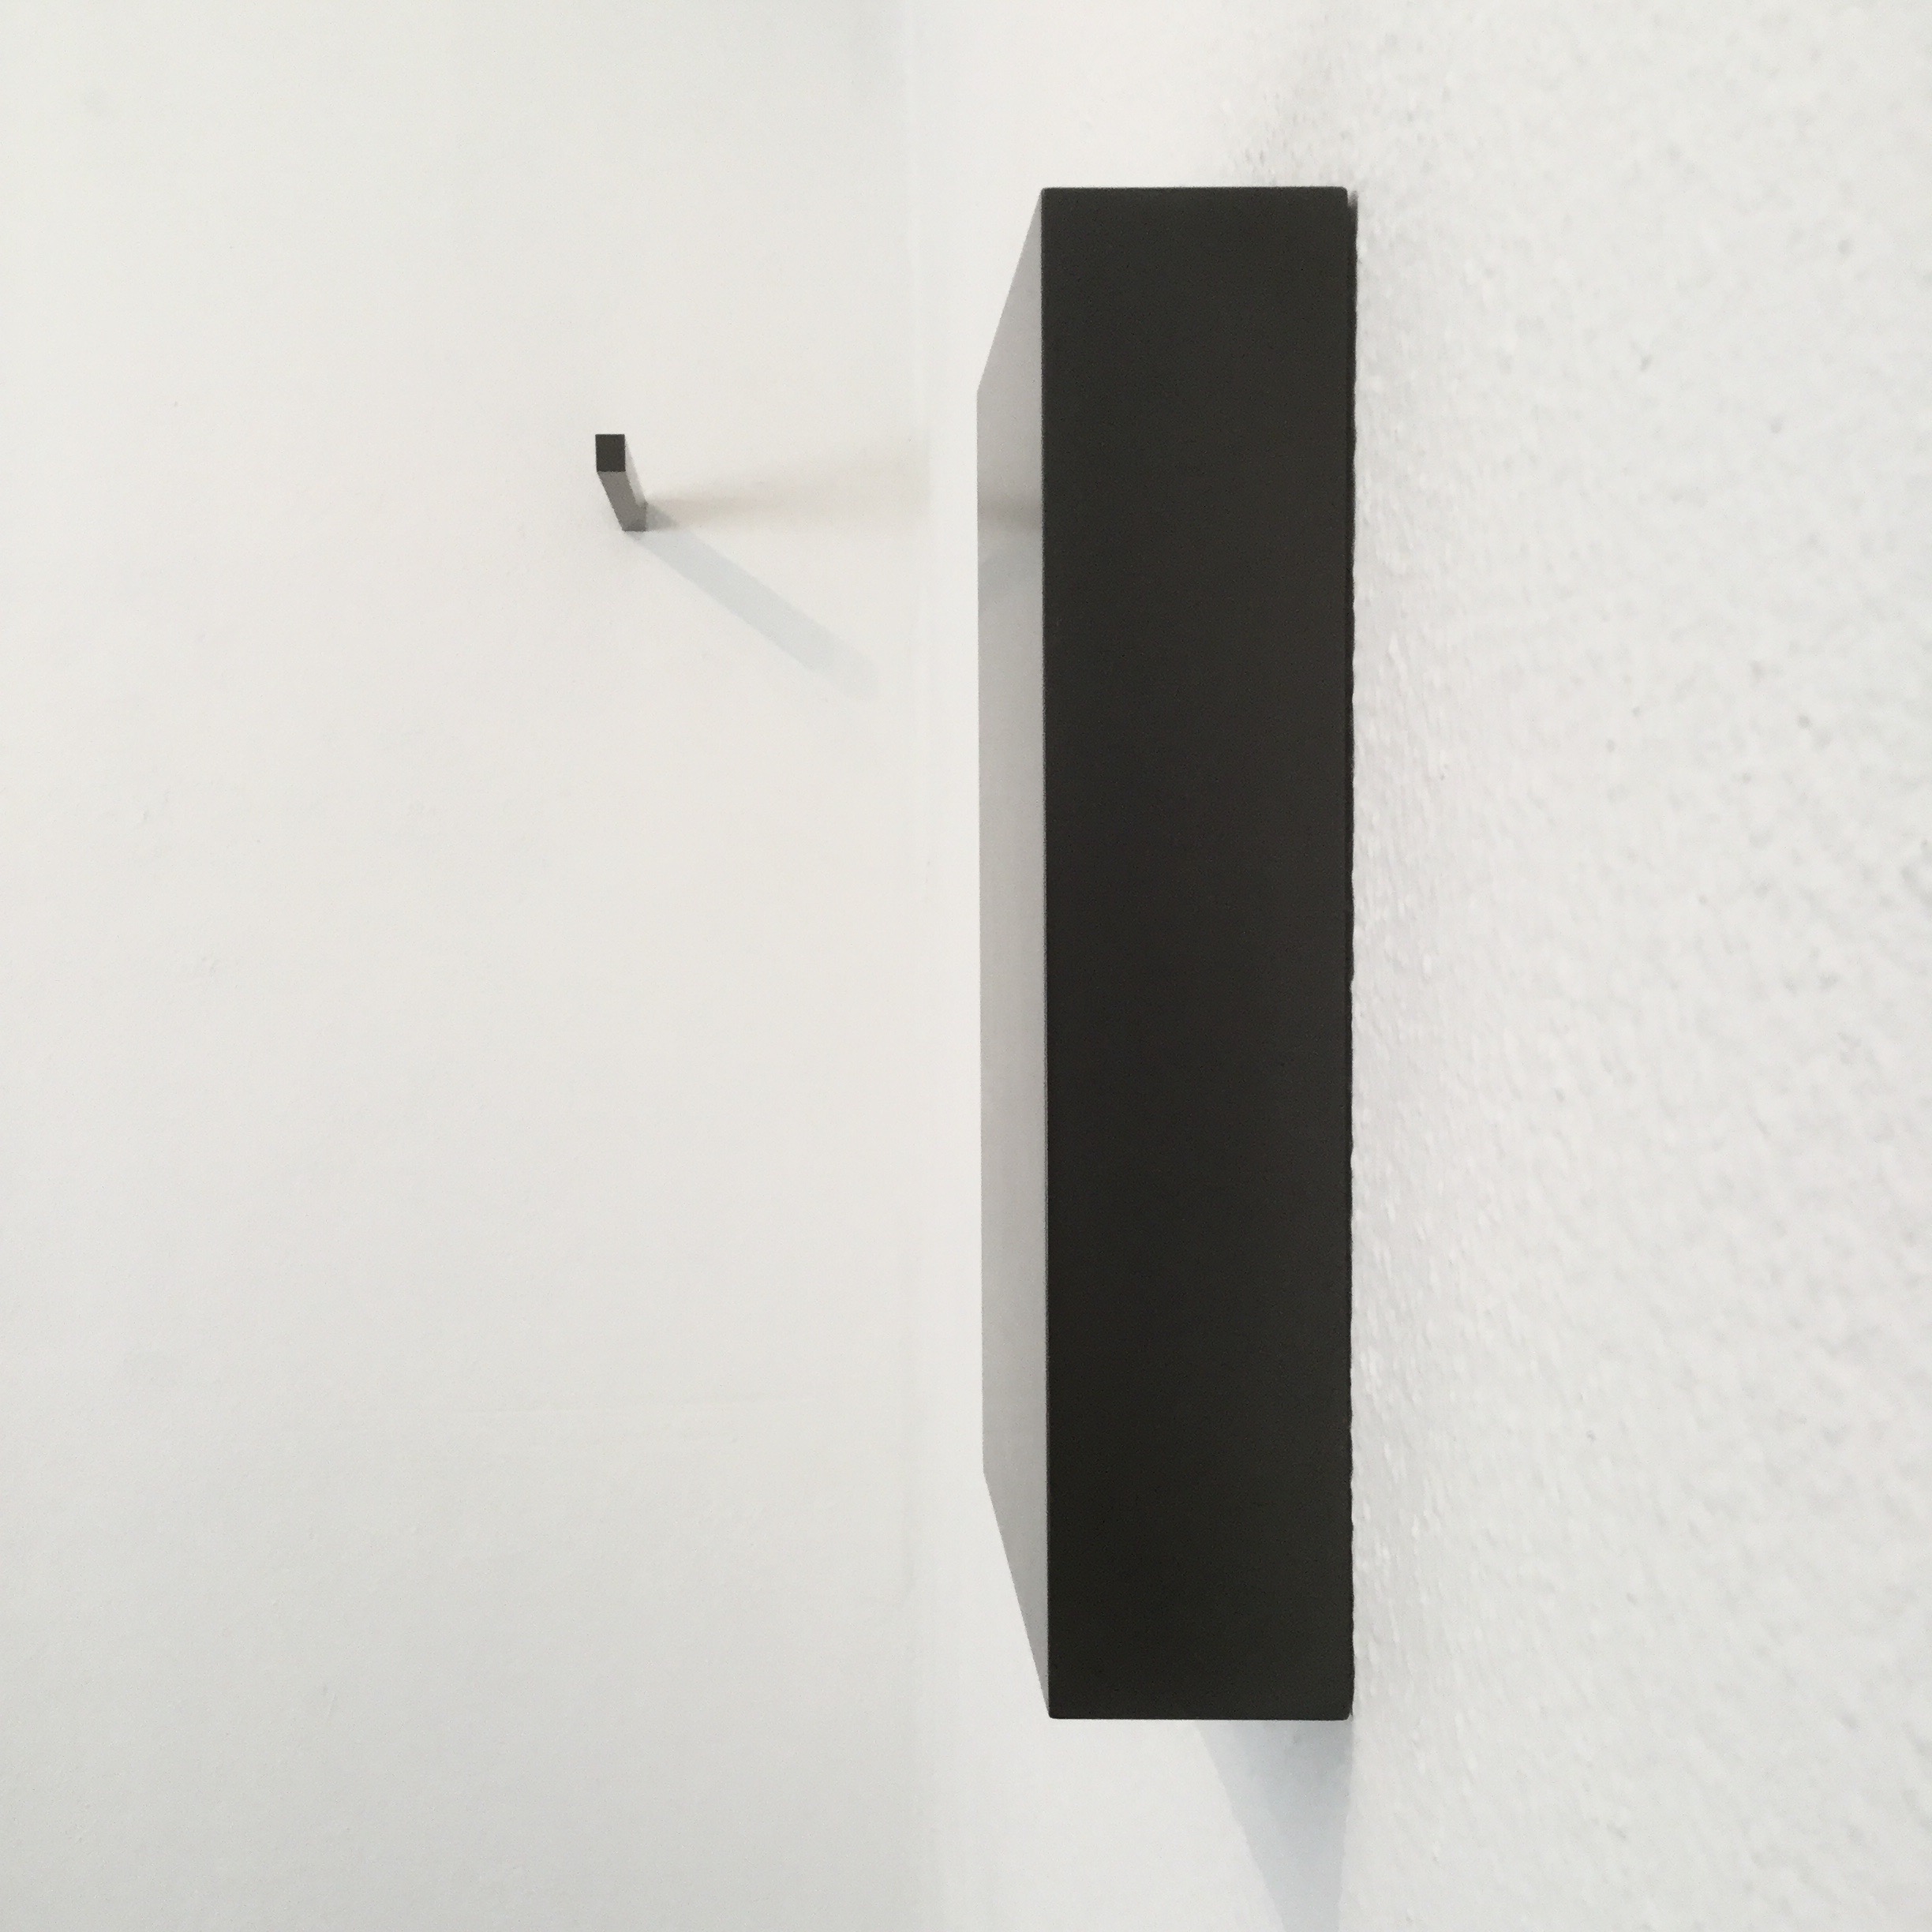  exhibitions 2d, 2015 (installation view)  Dimensions variable, Solid graphite 